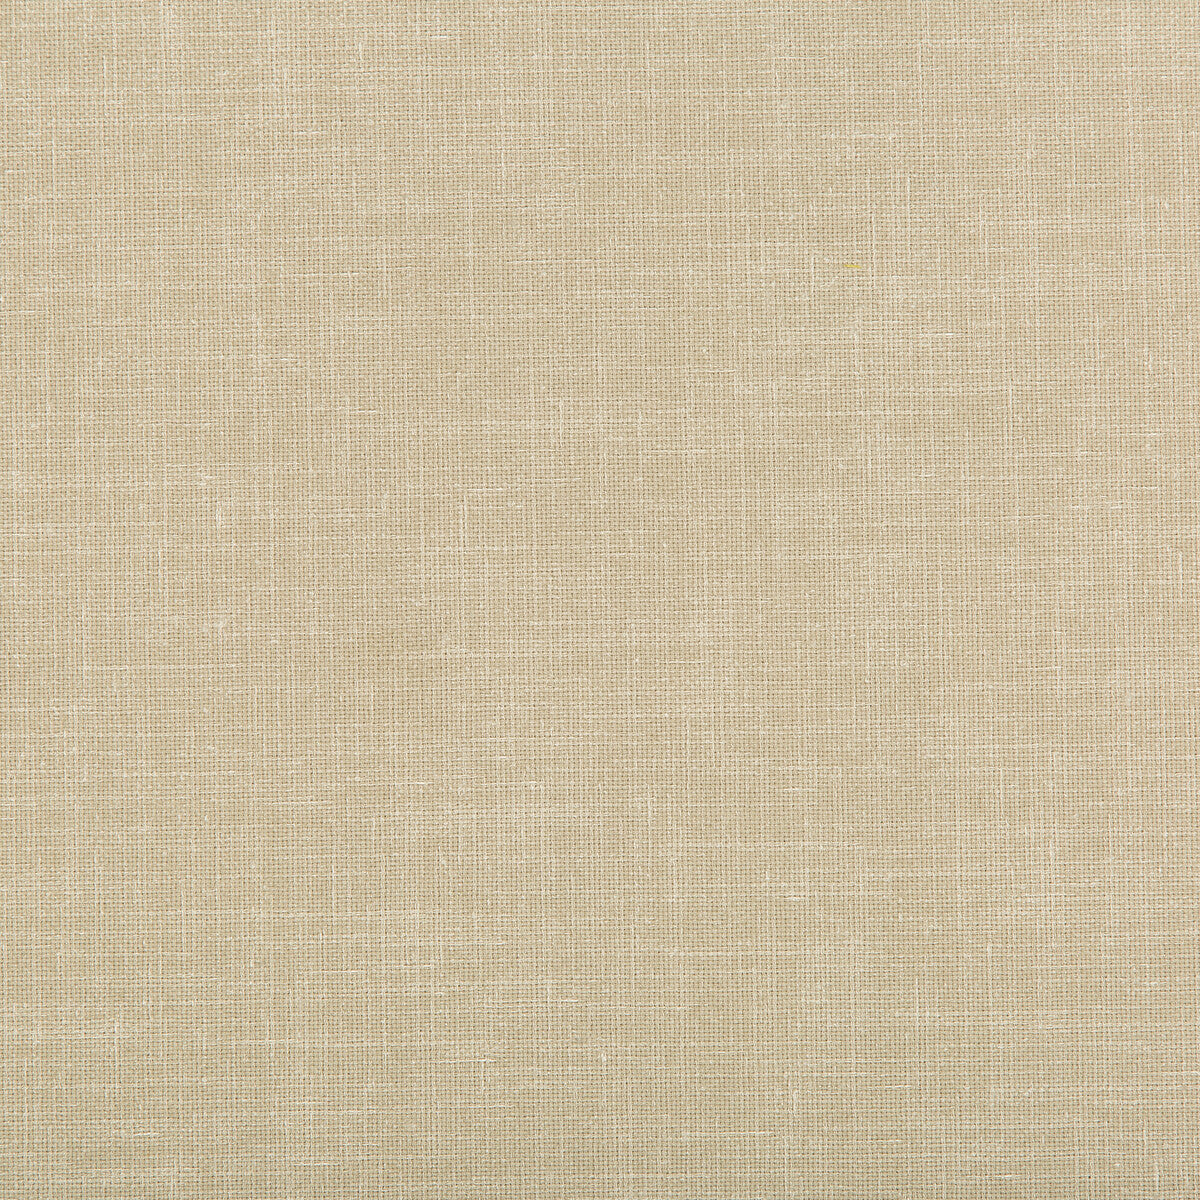 Kravet Contract fabric in 4639-16 color - pattern 4639.16.0 - by Kravet Contract